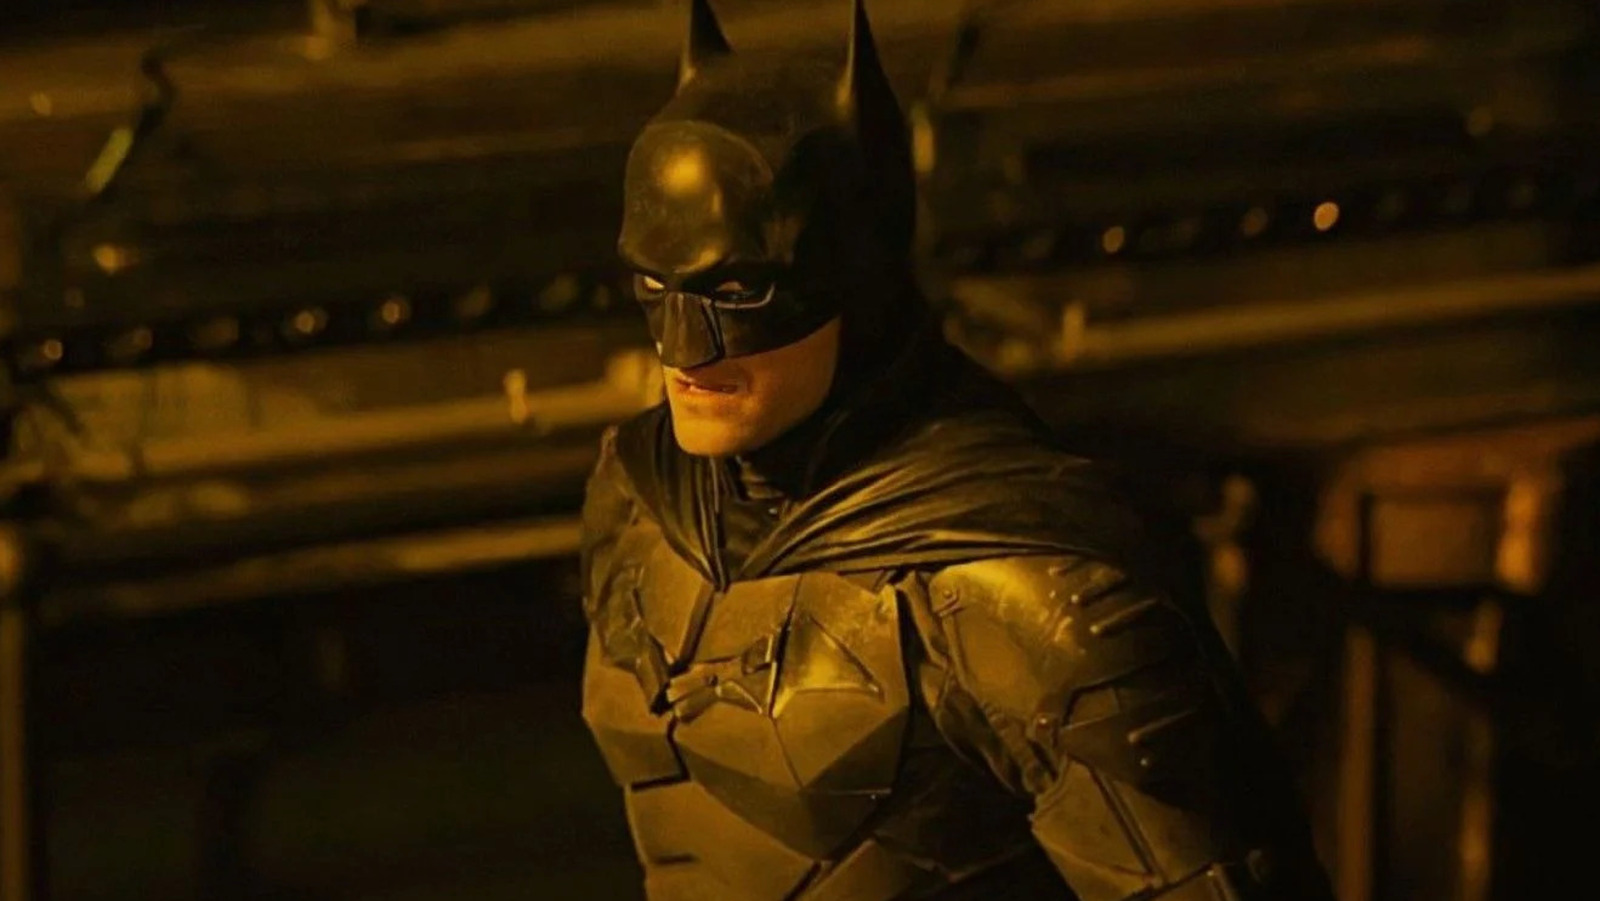 The Batman now streaming on HBO Max